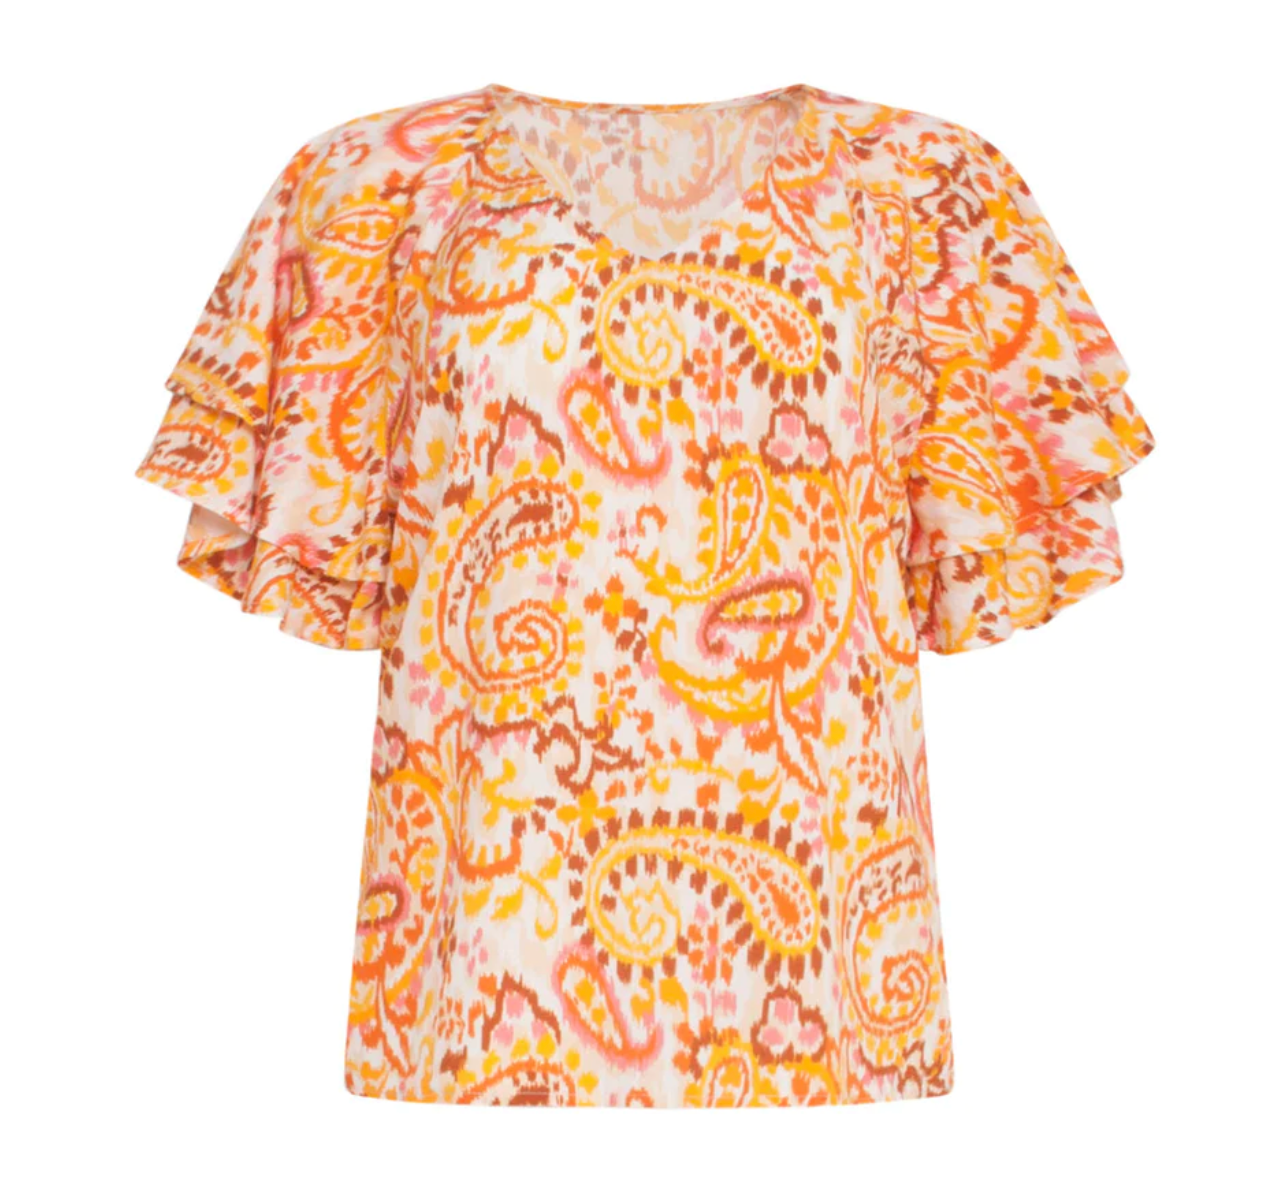 PAISLEY PRINT V-NECK TOP WITH RUFFLES